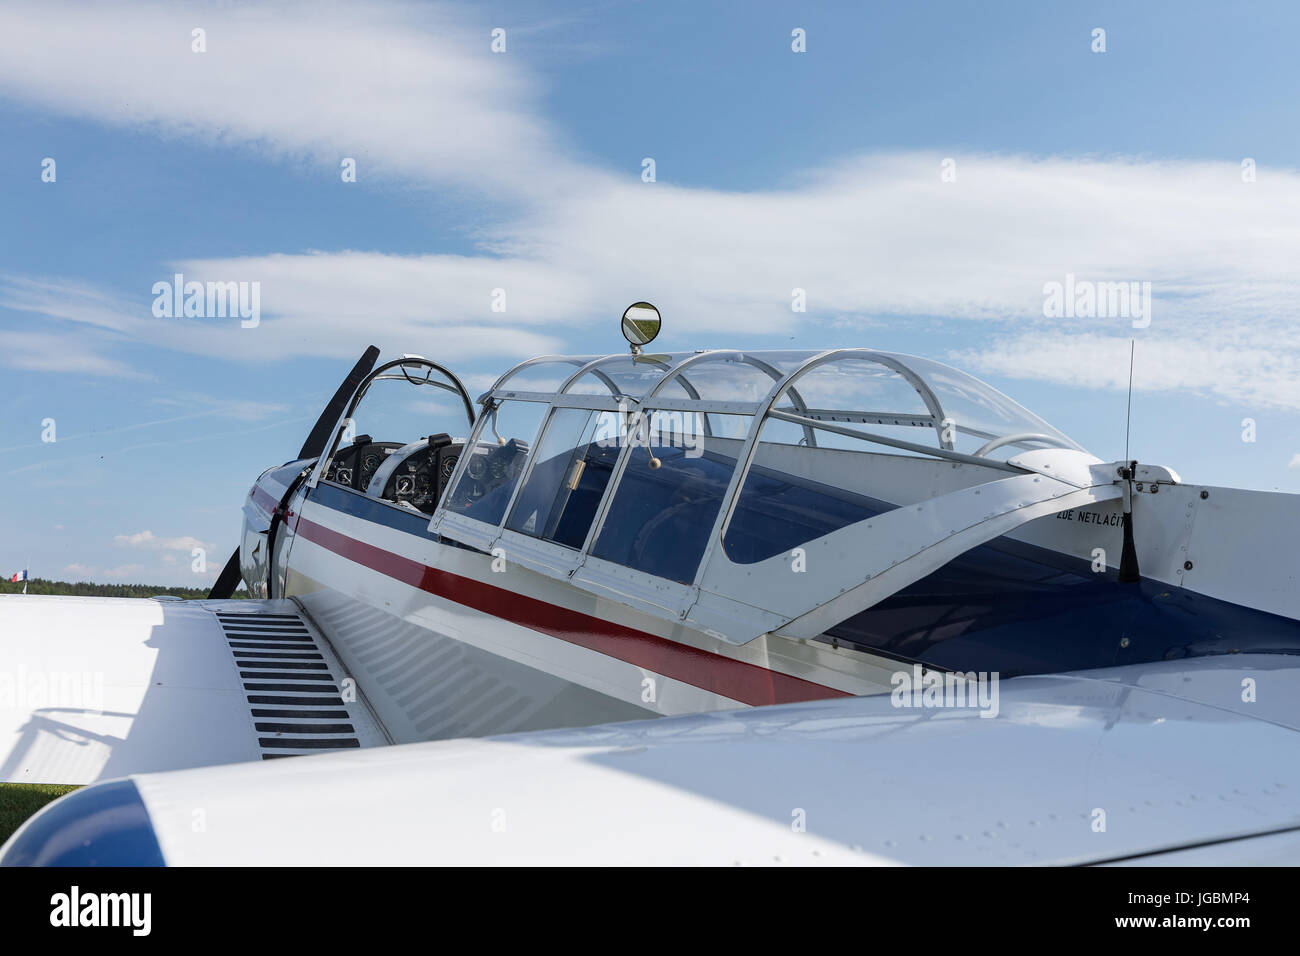 Two seat single engine civil utility aircraft, white small plane, red and blue strip is towed by a glider on a sunny day. Stock Photo